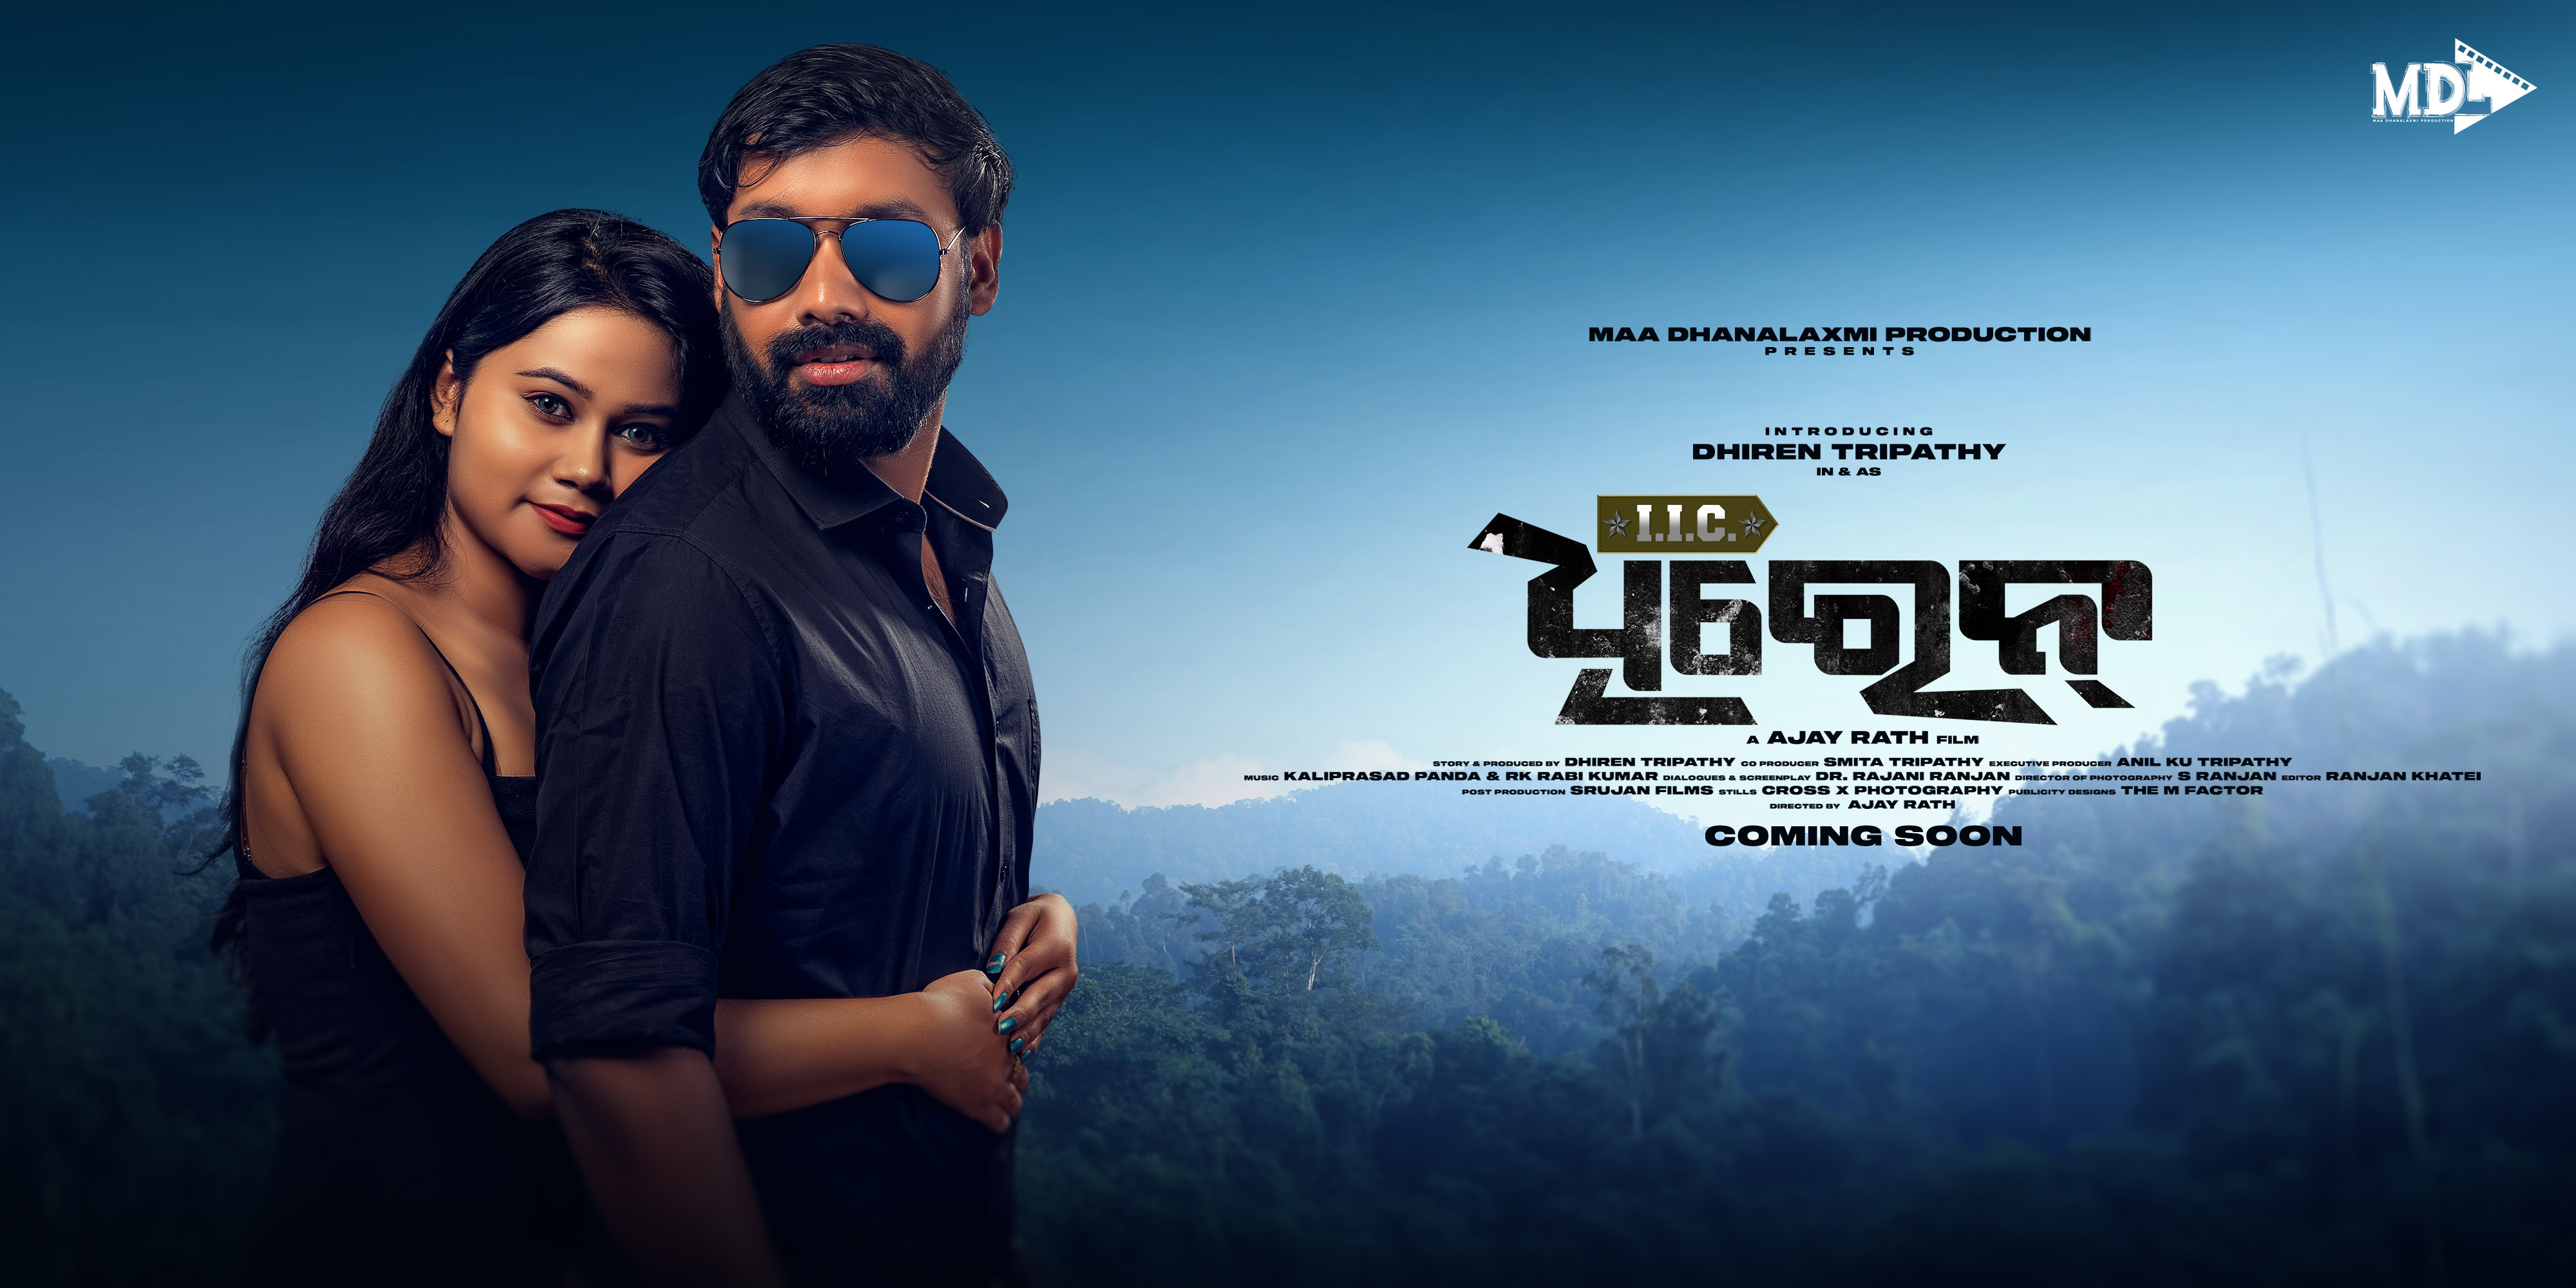 'IIC Dhiren' official poster